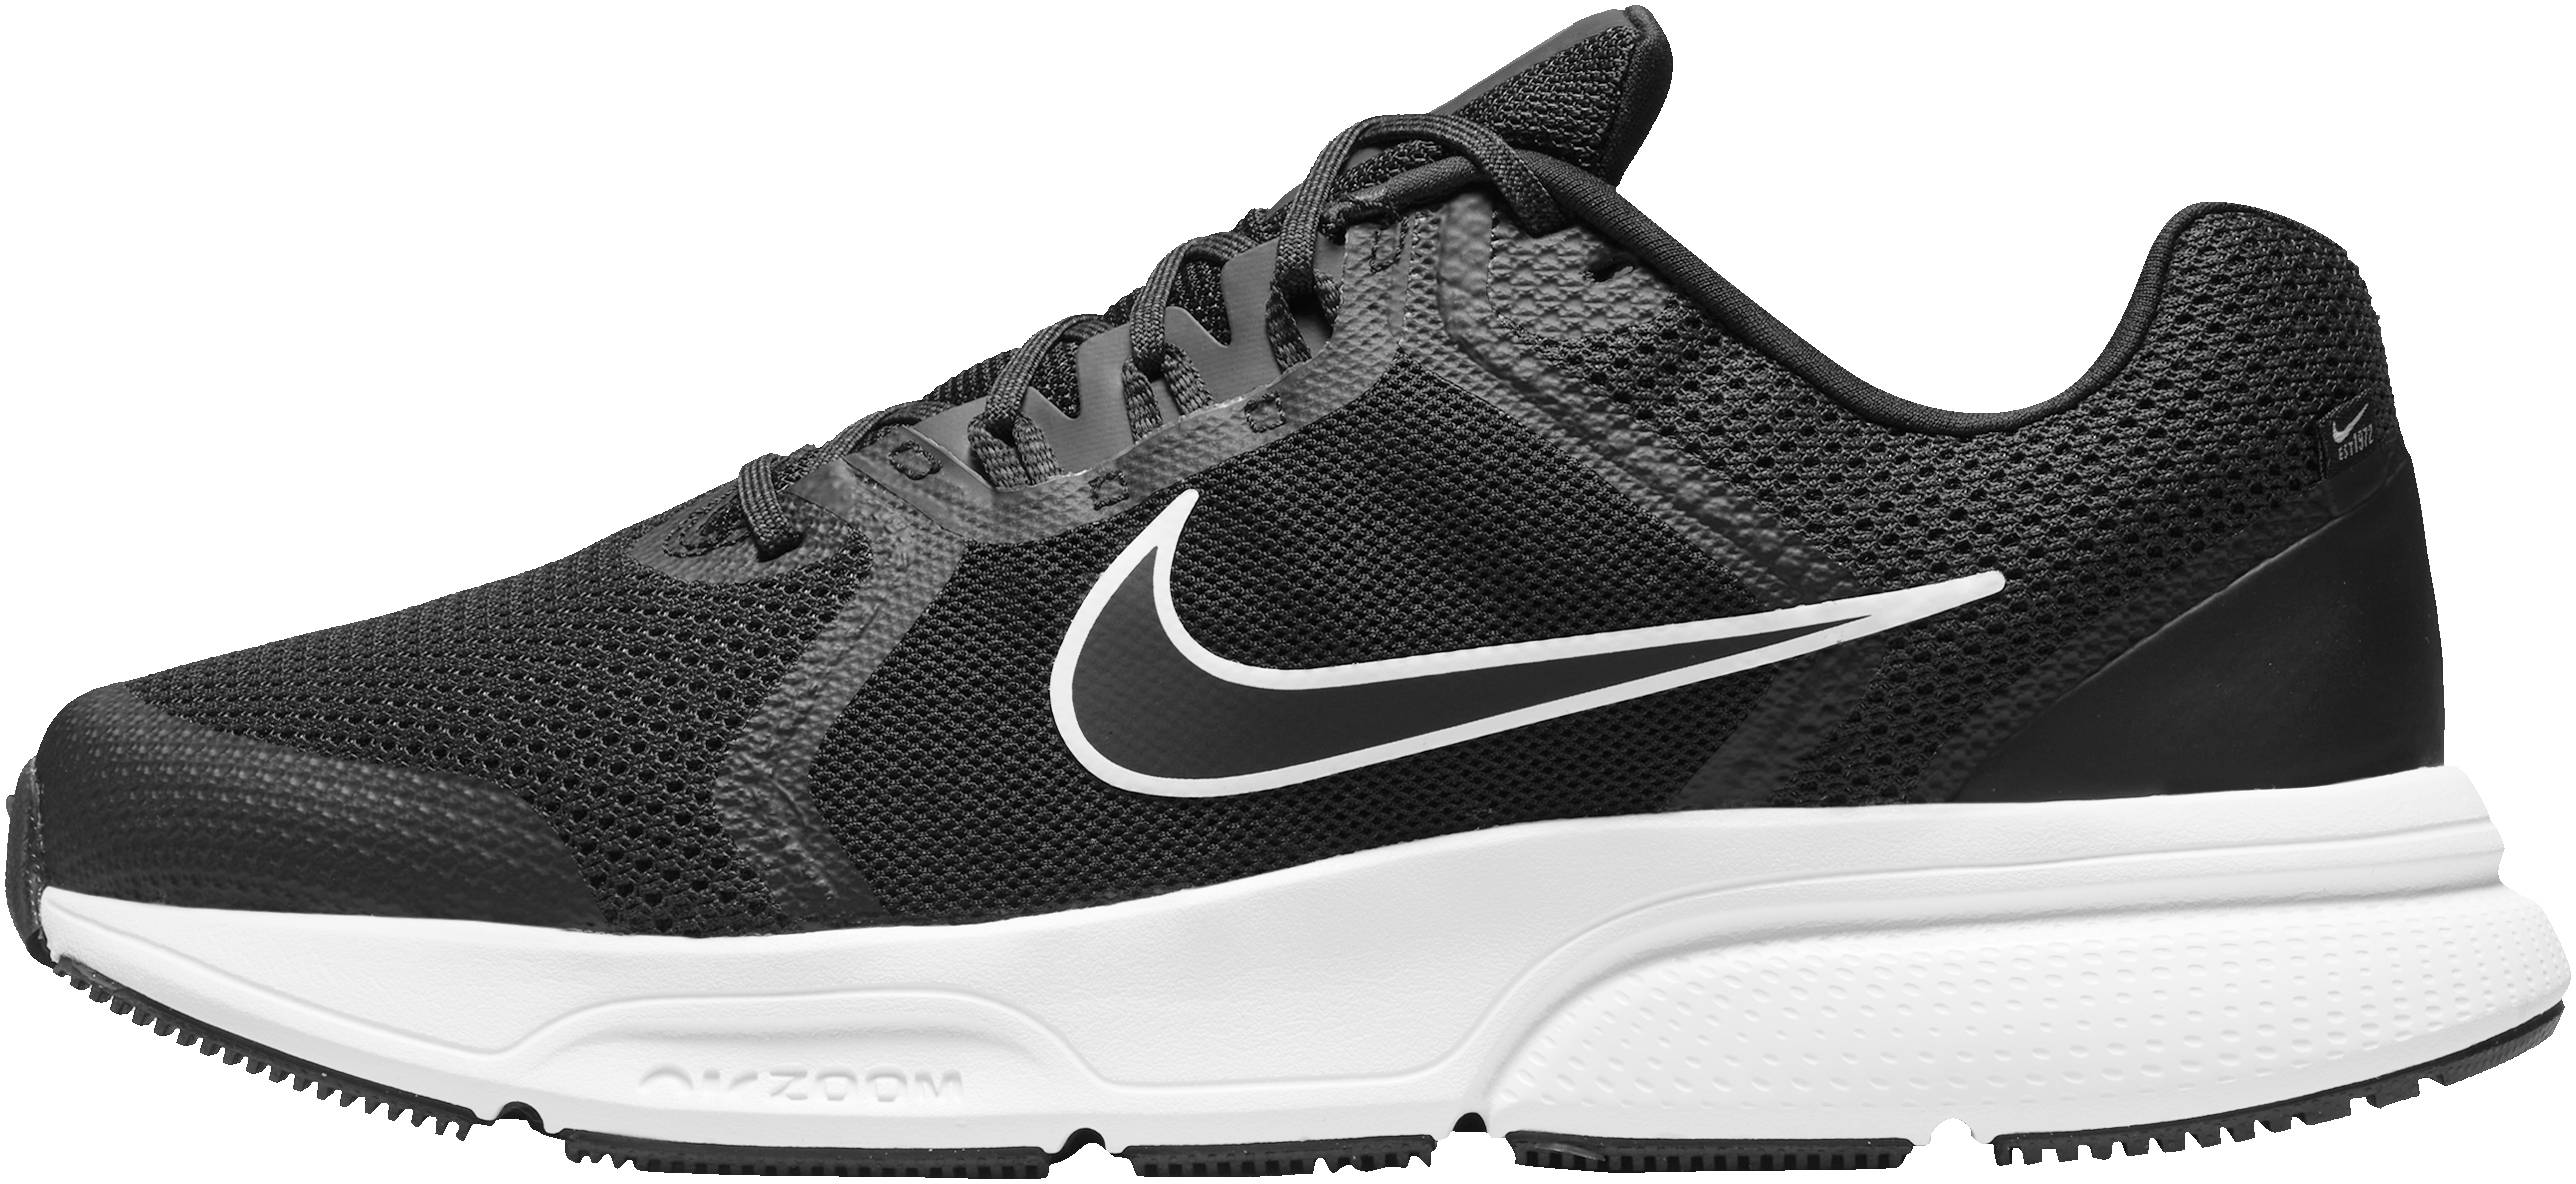 Inside Steadily Caroline Nike Zoom Span 4 Review, Facts, Comparison | RunRepeat